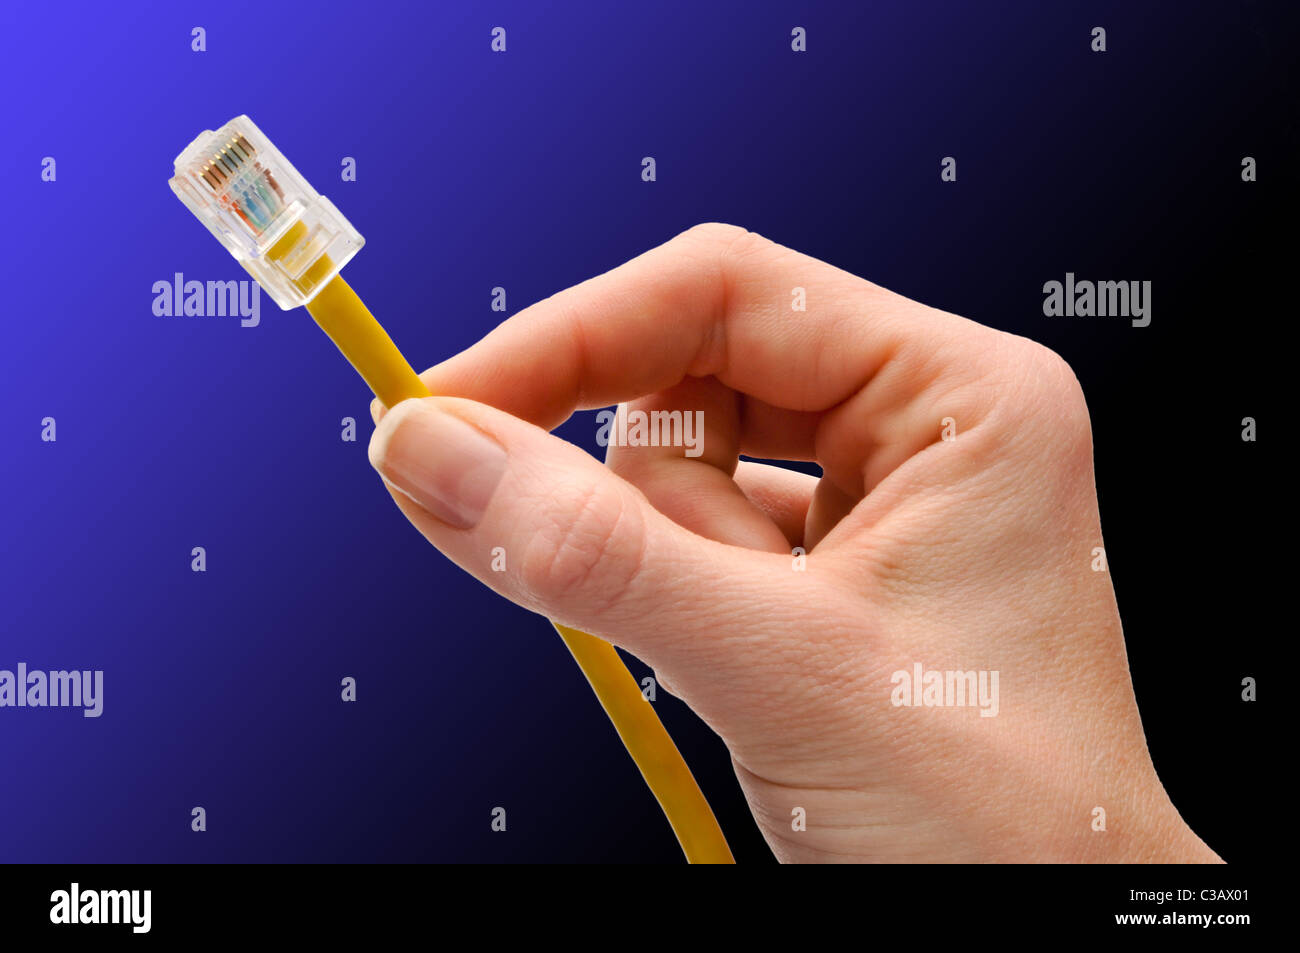 hand holding cat 5 network cable in fingers Stock Photo